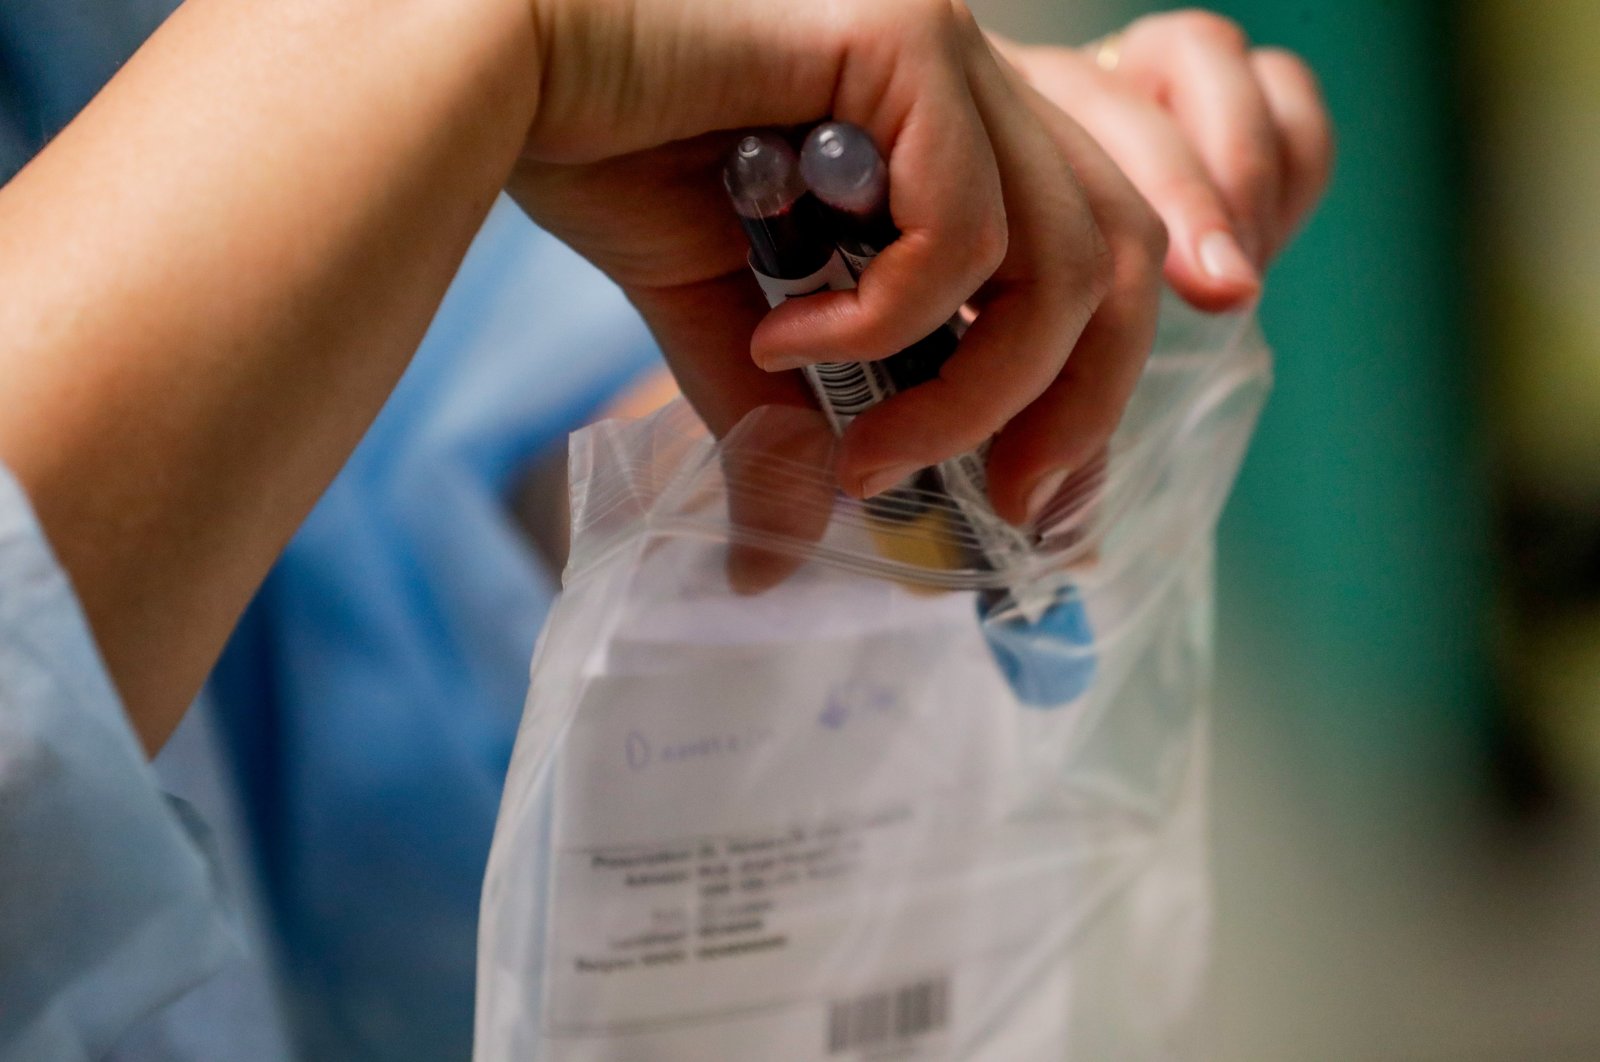 A nurse packs samples after drawing blood from a coronavirus patient in the COVID-19 hospitalization unit at the Etterbeek-Ixelles site of the Iris Sud Hospitals in Brussels, Belgium, Oct. 21, 2020. (EPA Photo)